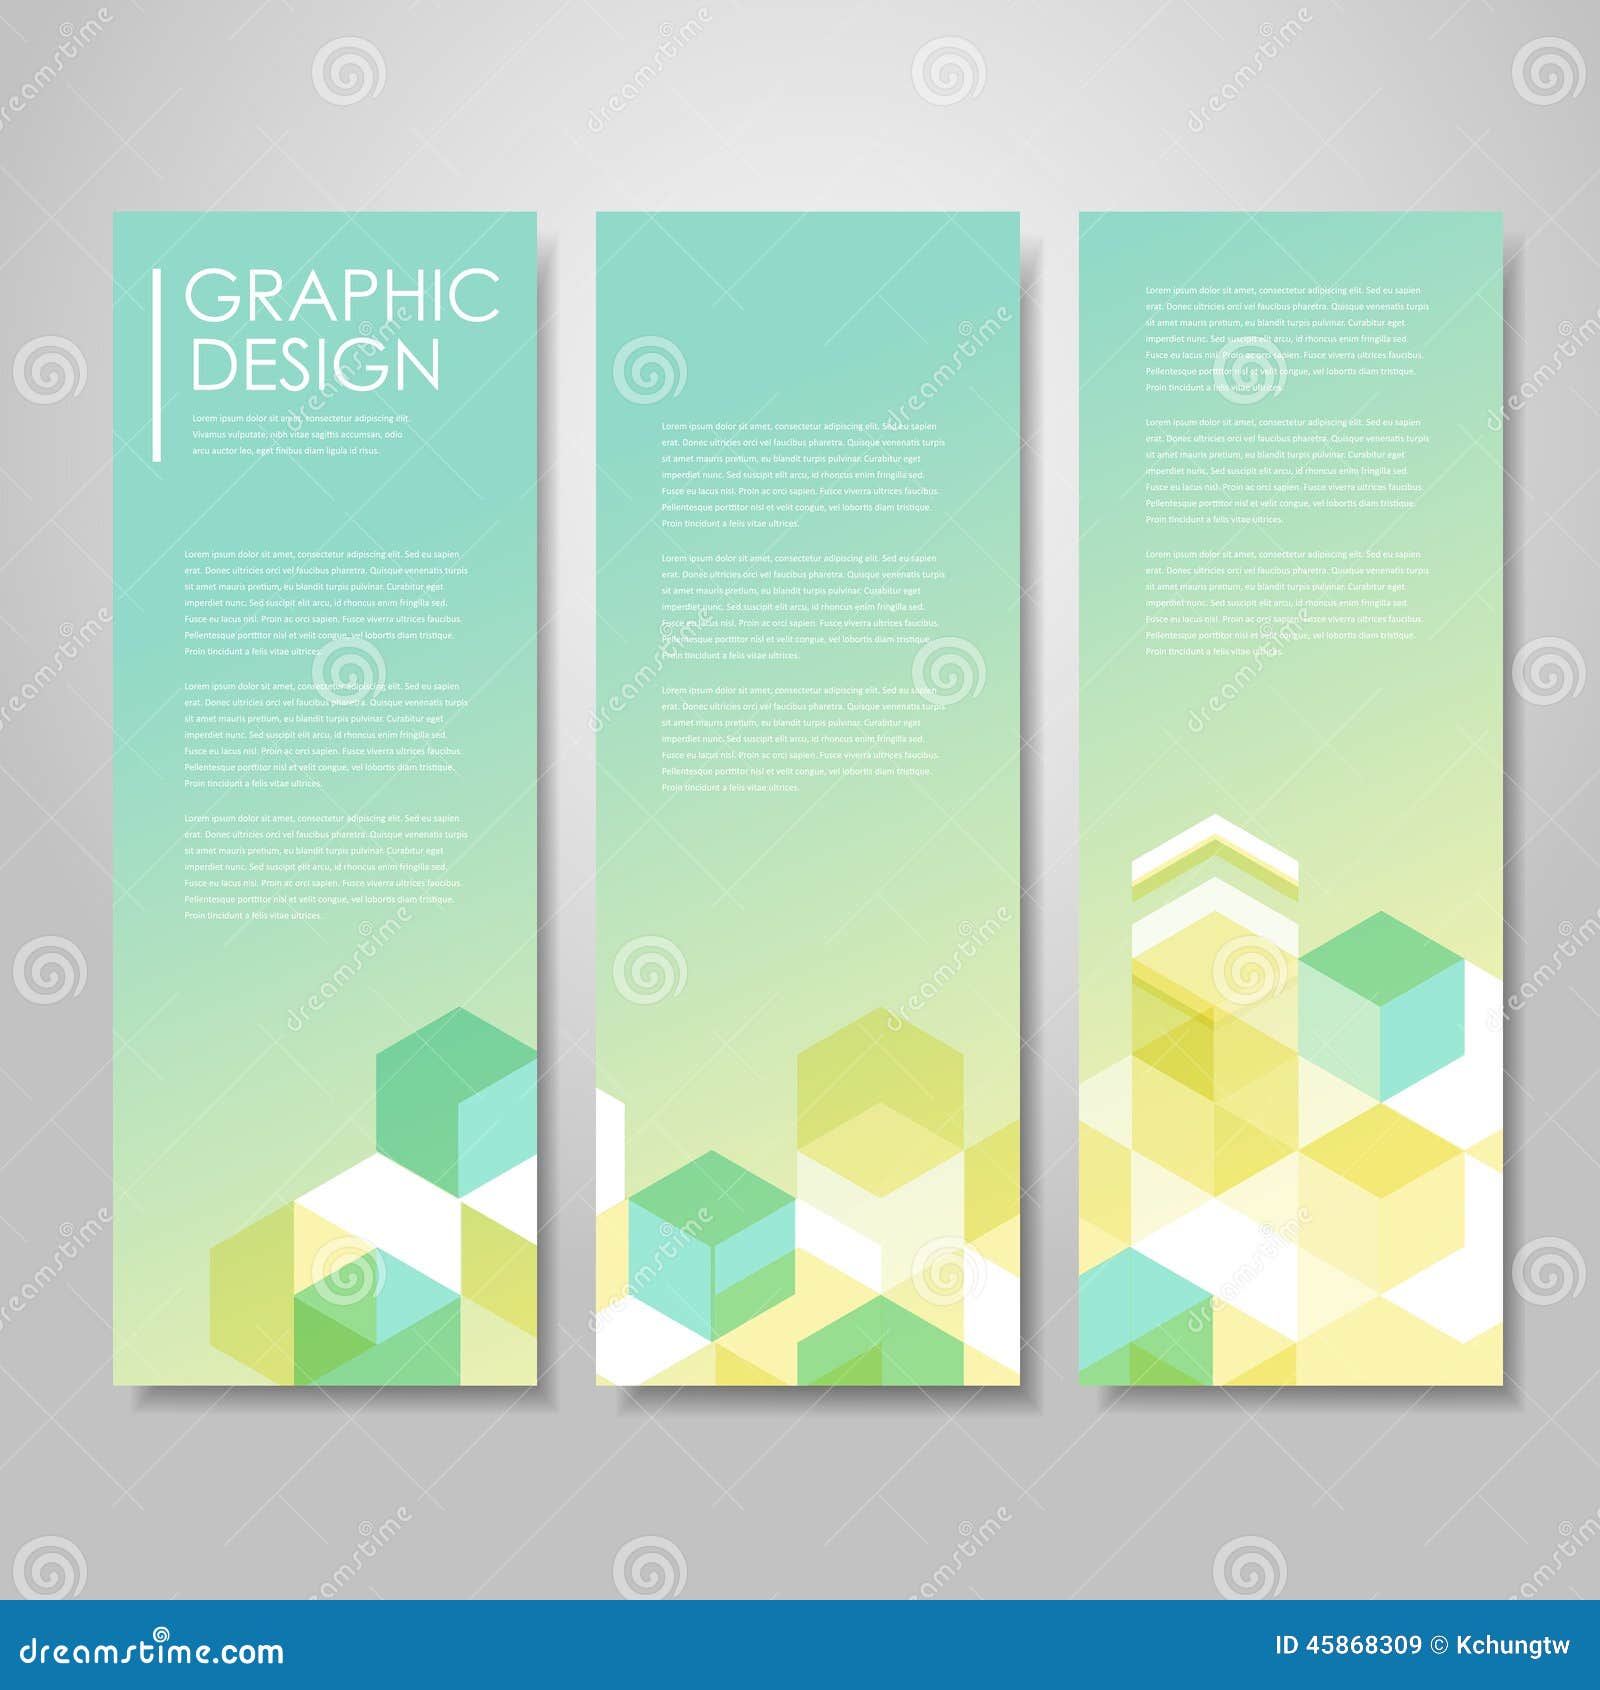 Simple Background for Banners Set with Hexagons Element Stock Vector -  Illustration of light, bright: 45868309